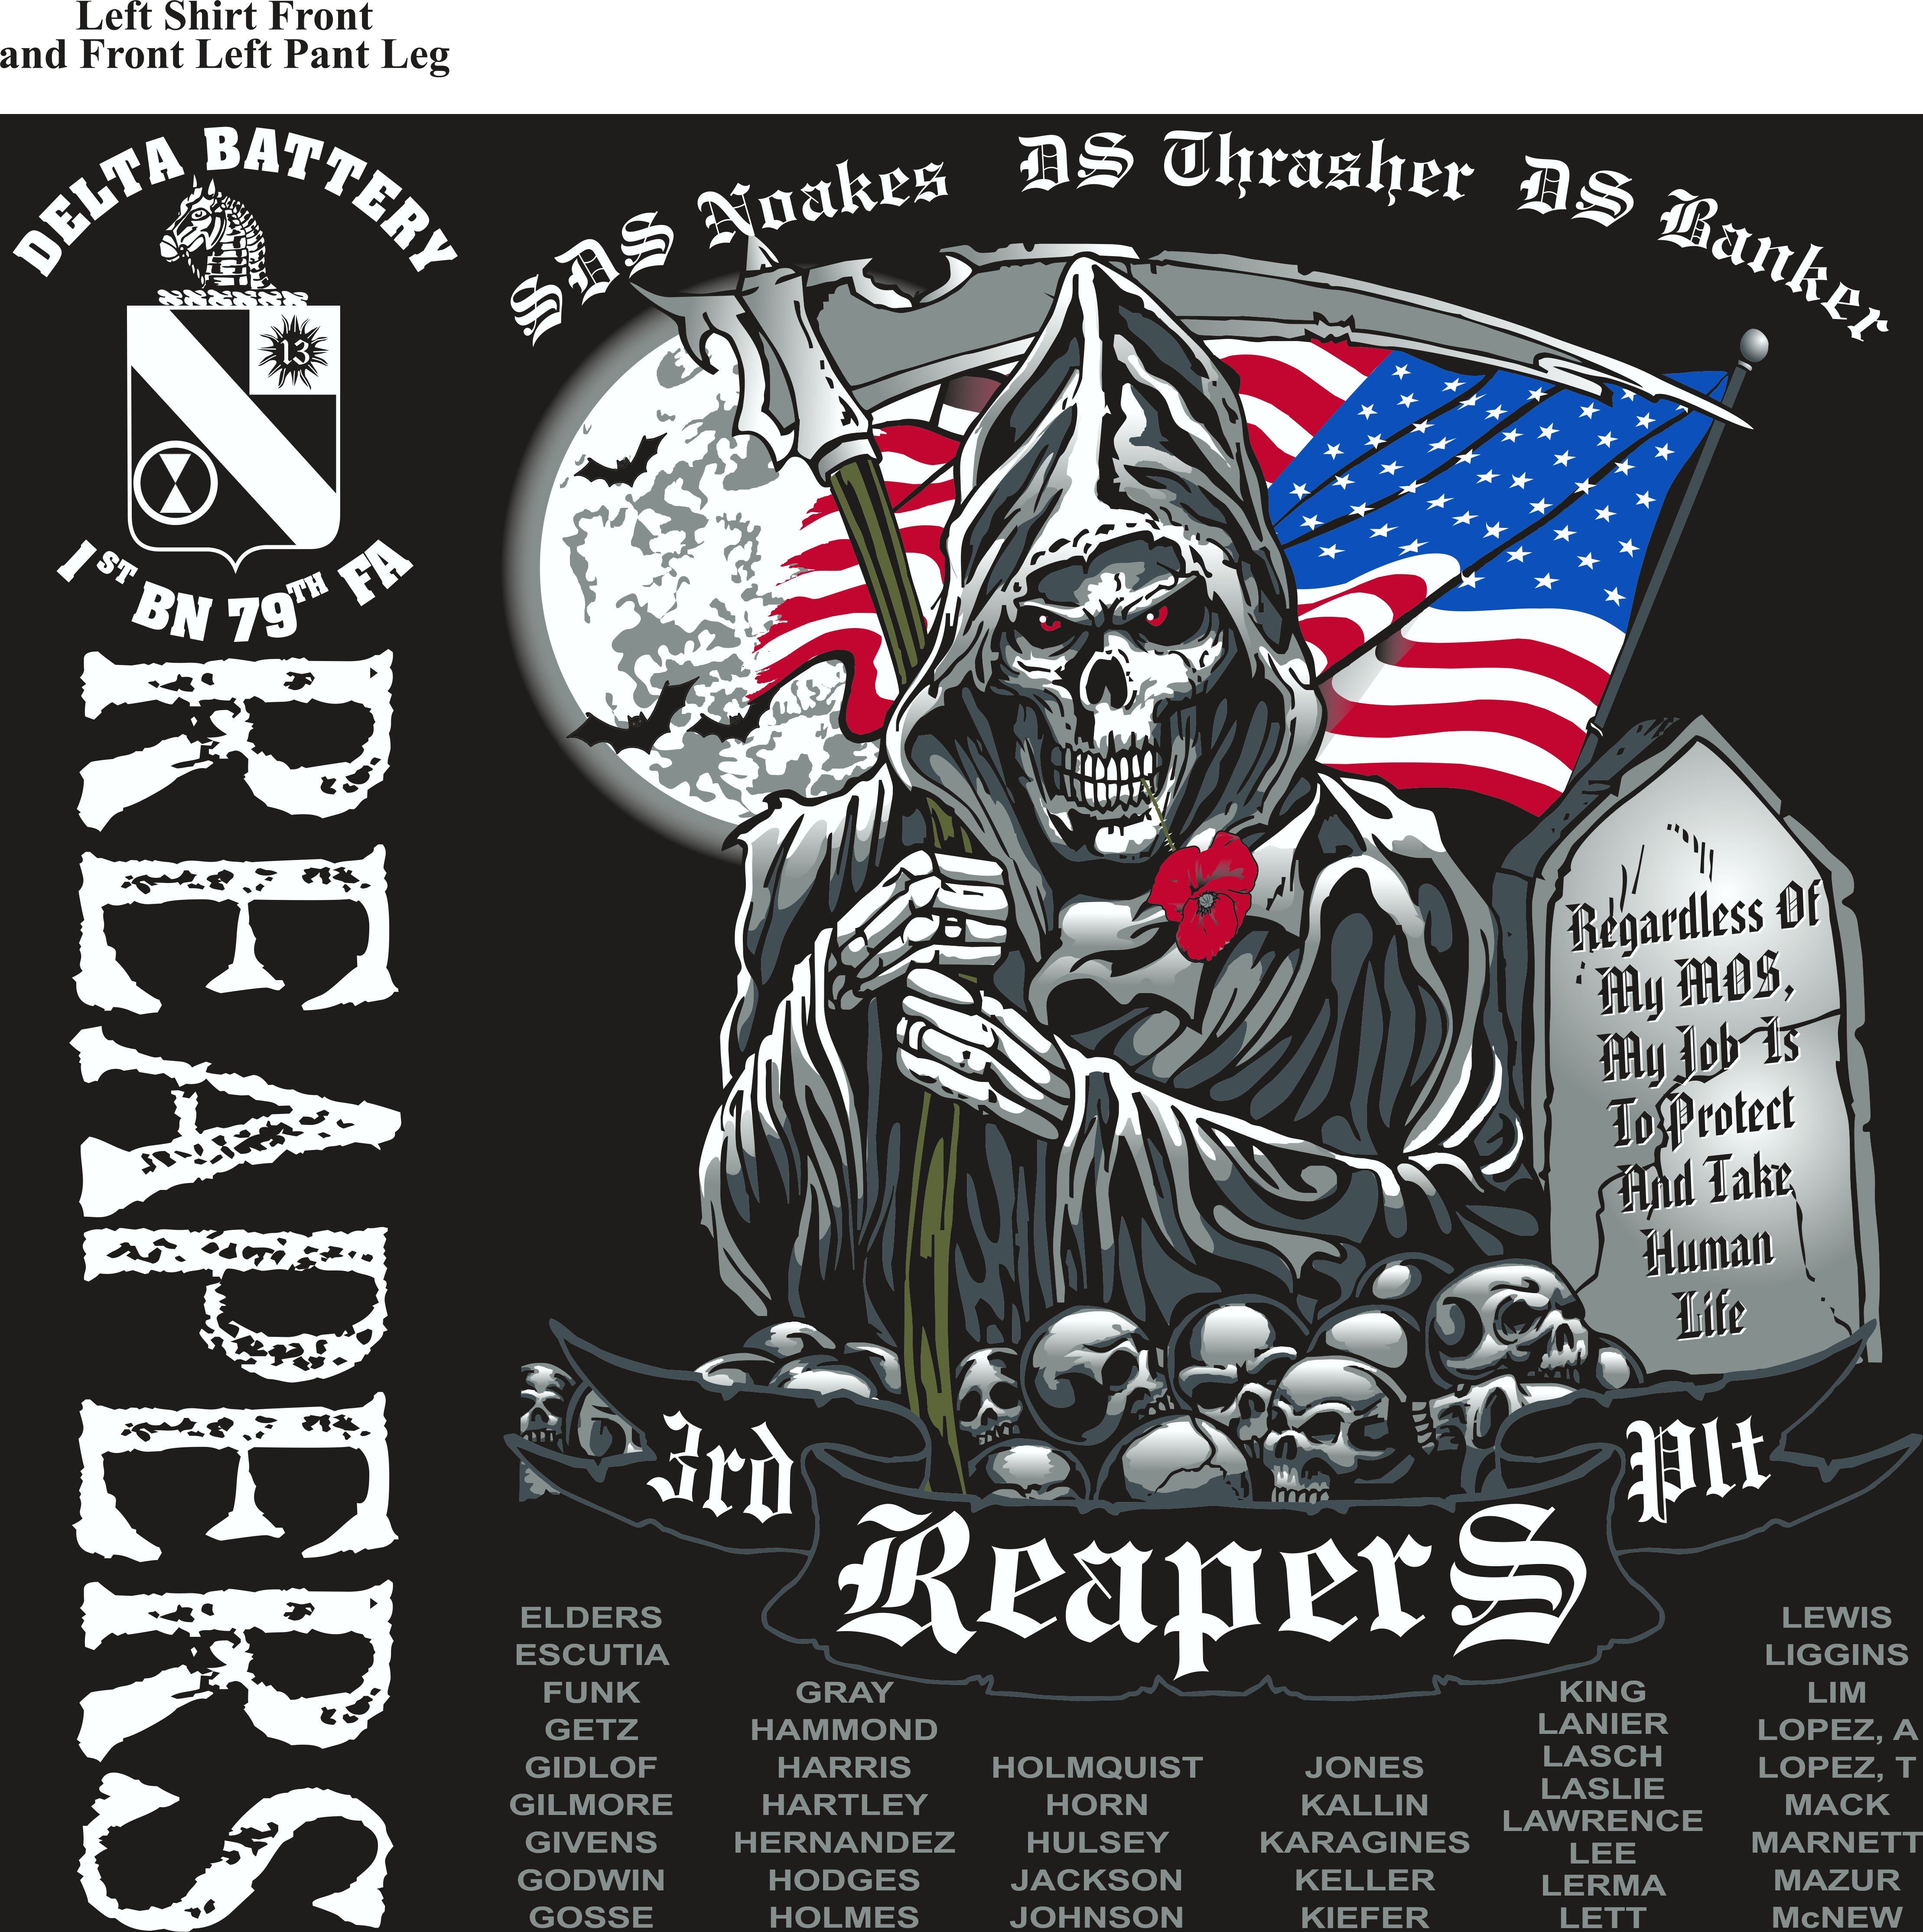 Platoon Shirts (2nd generation print) DELTA 1st 79th REAPERS MAY 2018